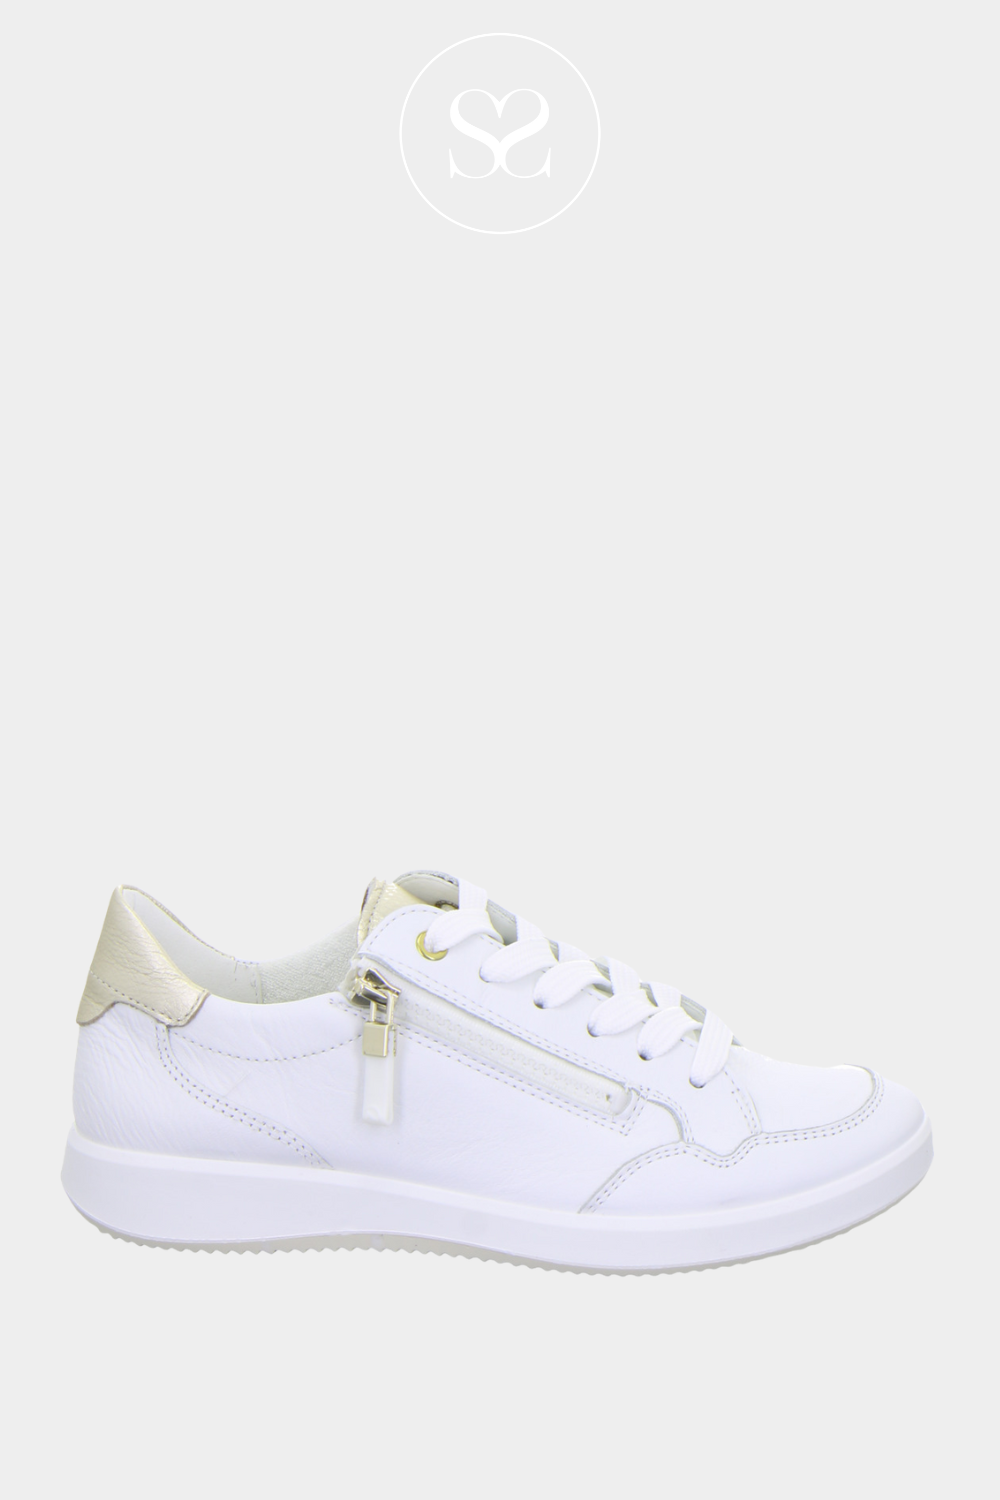 ARA 12-23901-04 WHITE LEATHER TRAINERS WITH GOLD HEEL CAP, LACES AND SIDE ZIP